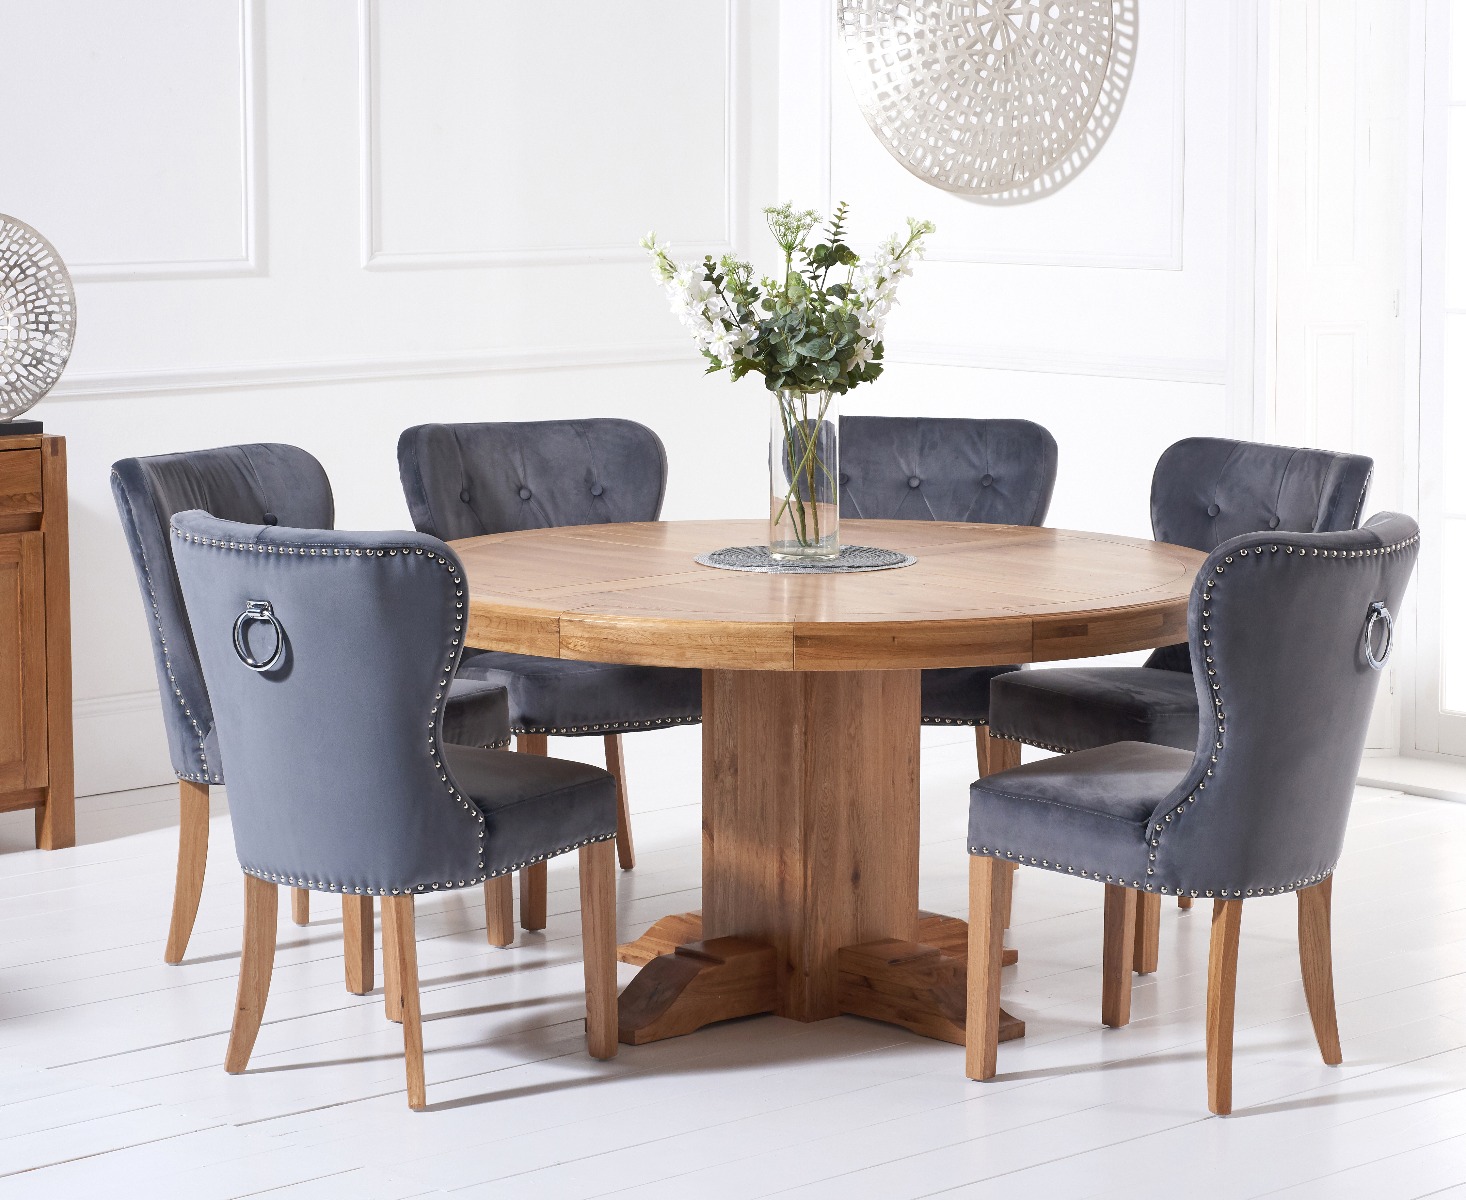 Helmsley 150cm Solid Oak Round Pedestal Dining Table With 4 Grey Keswick Velvet Chairs